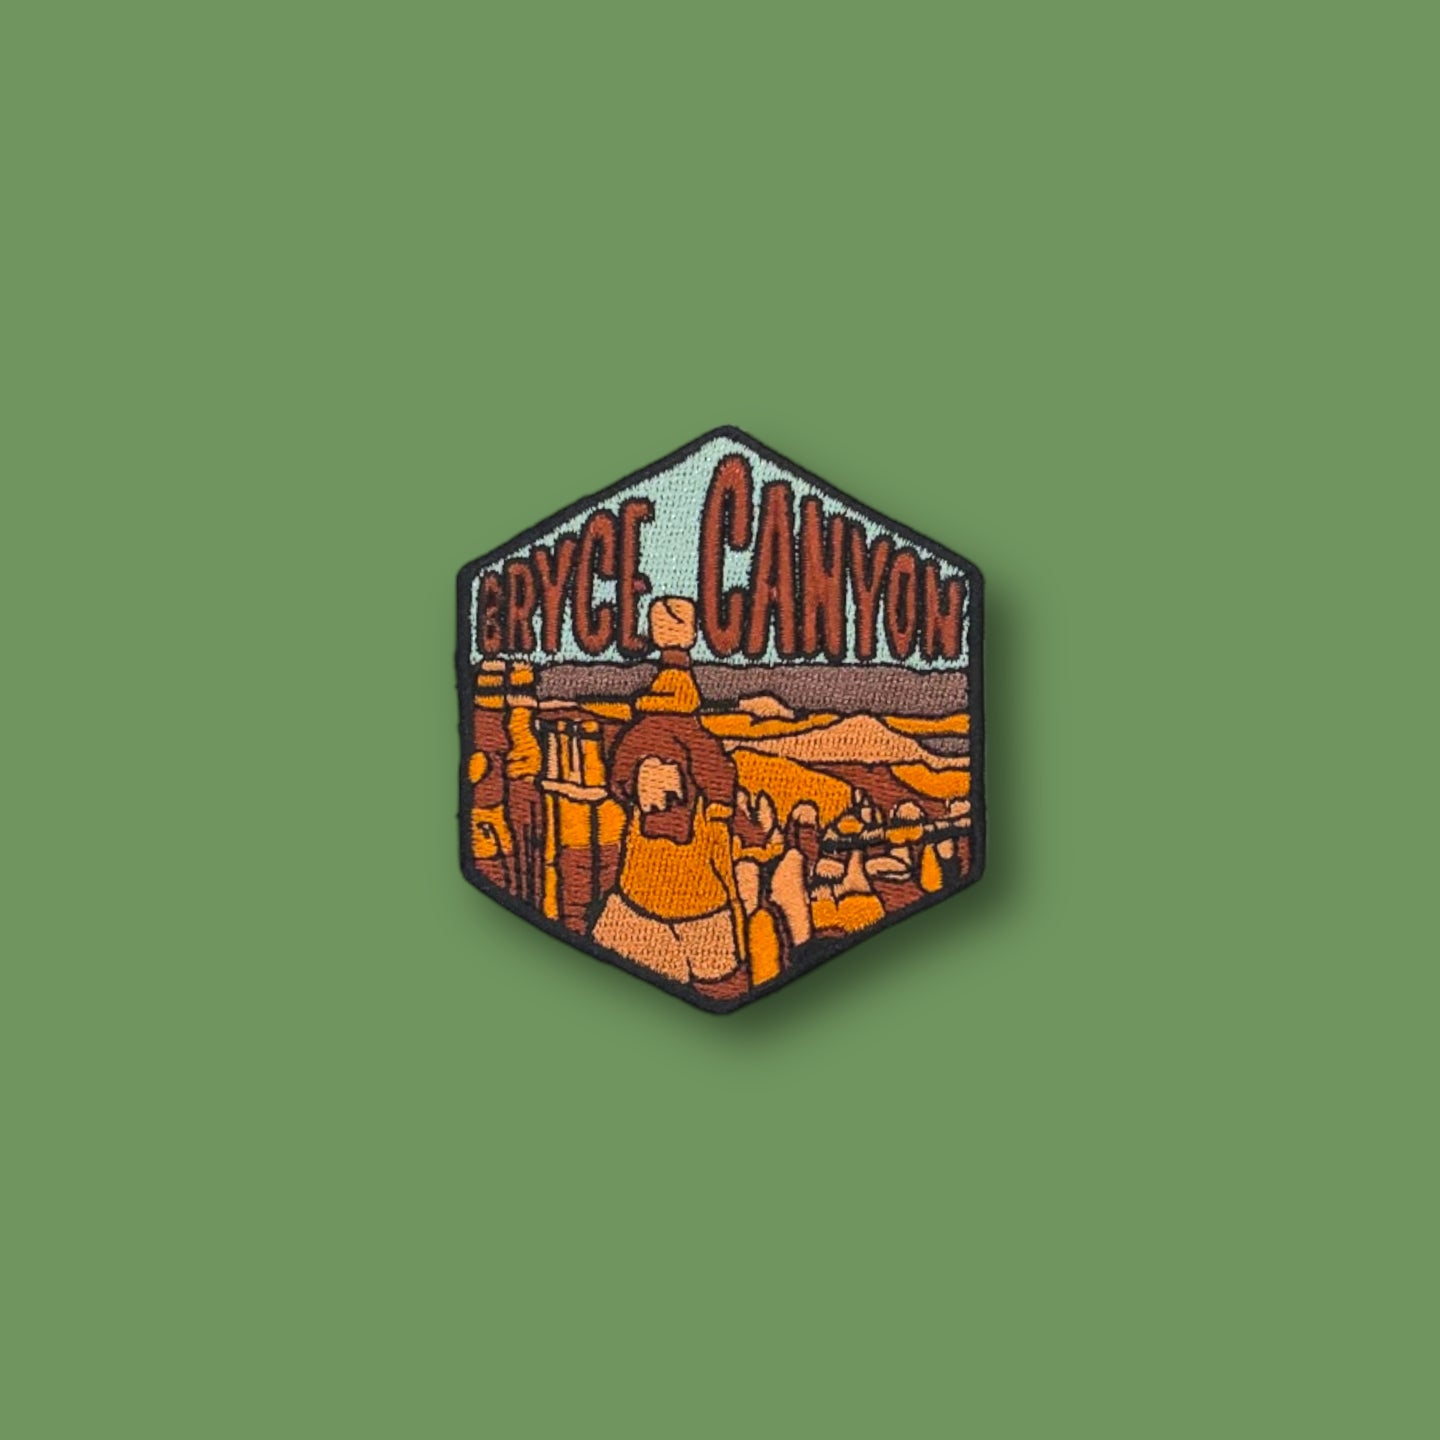 Bryce Canyon National Park, Utah- Embroidered Hexagon Patch